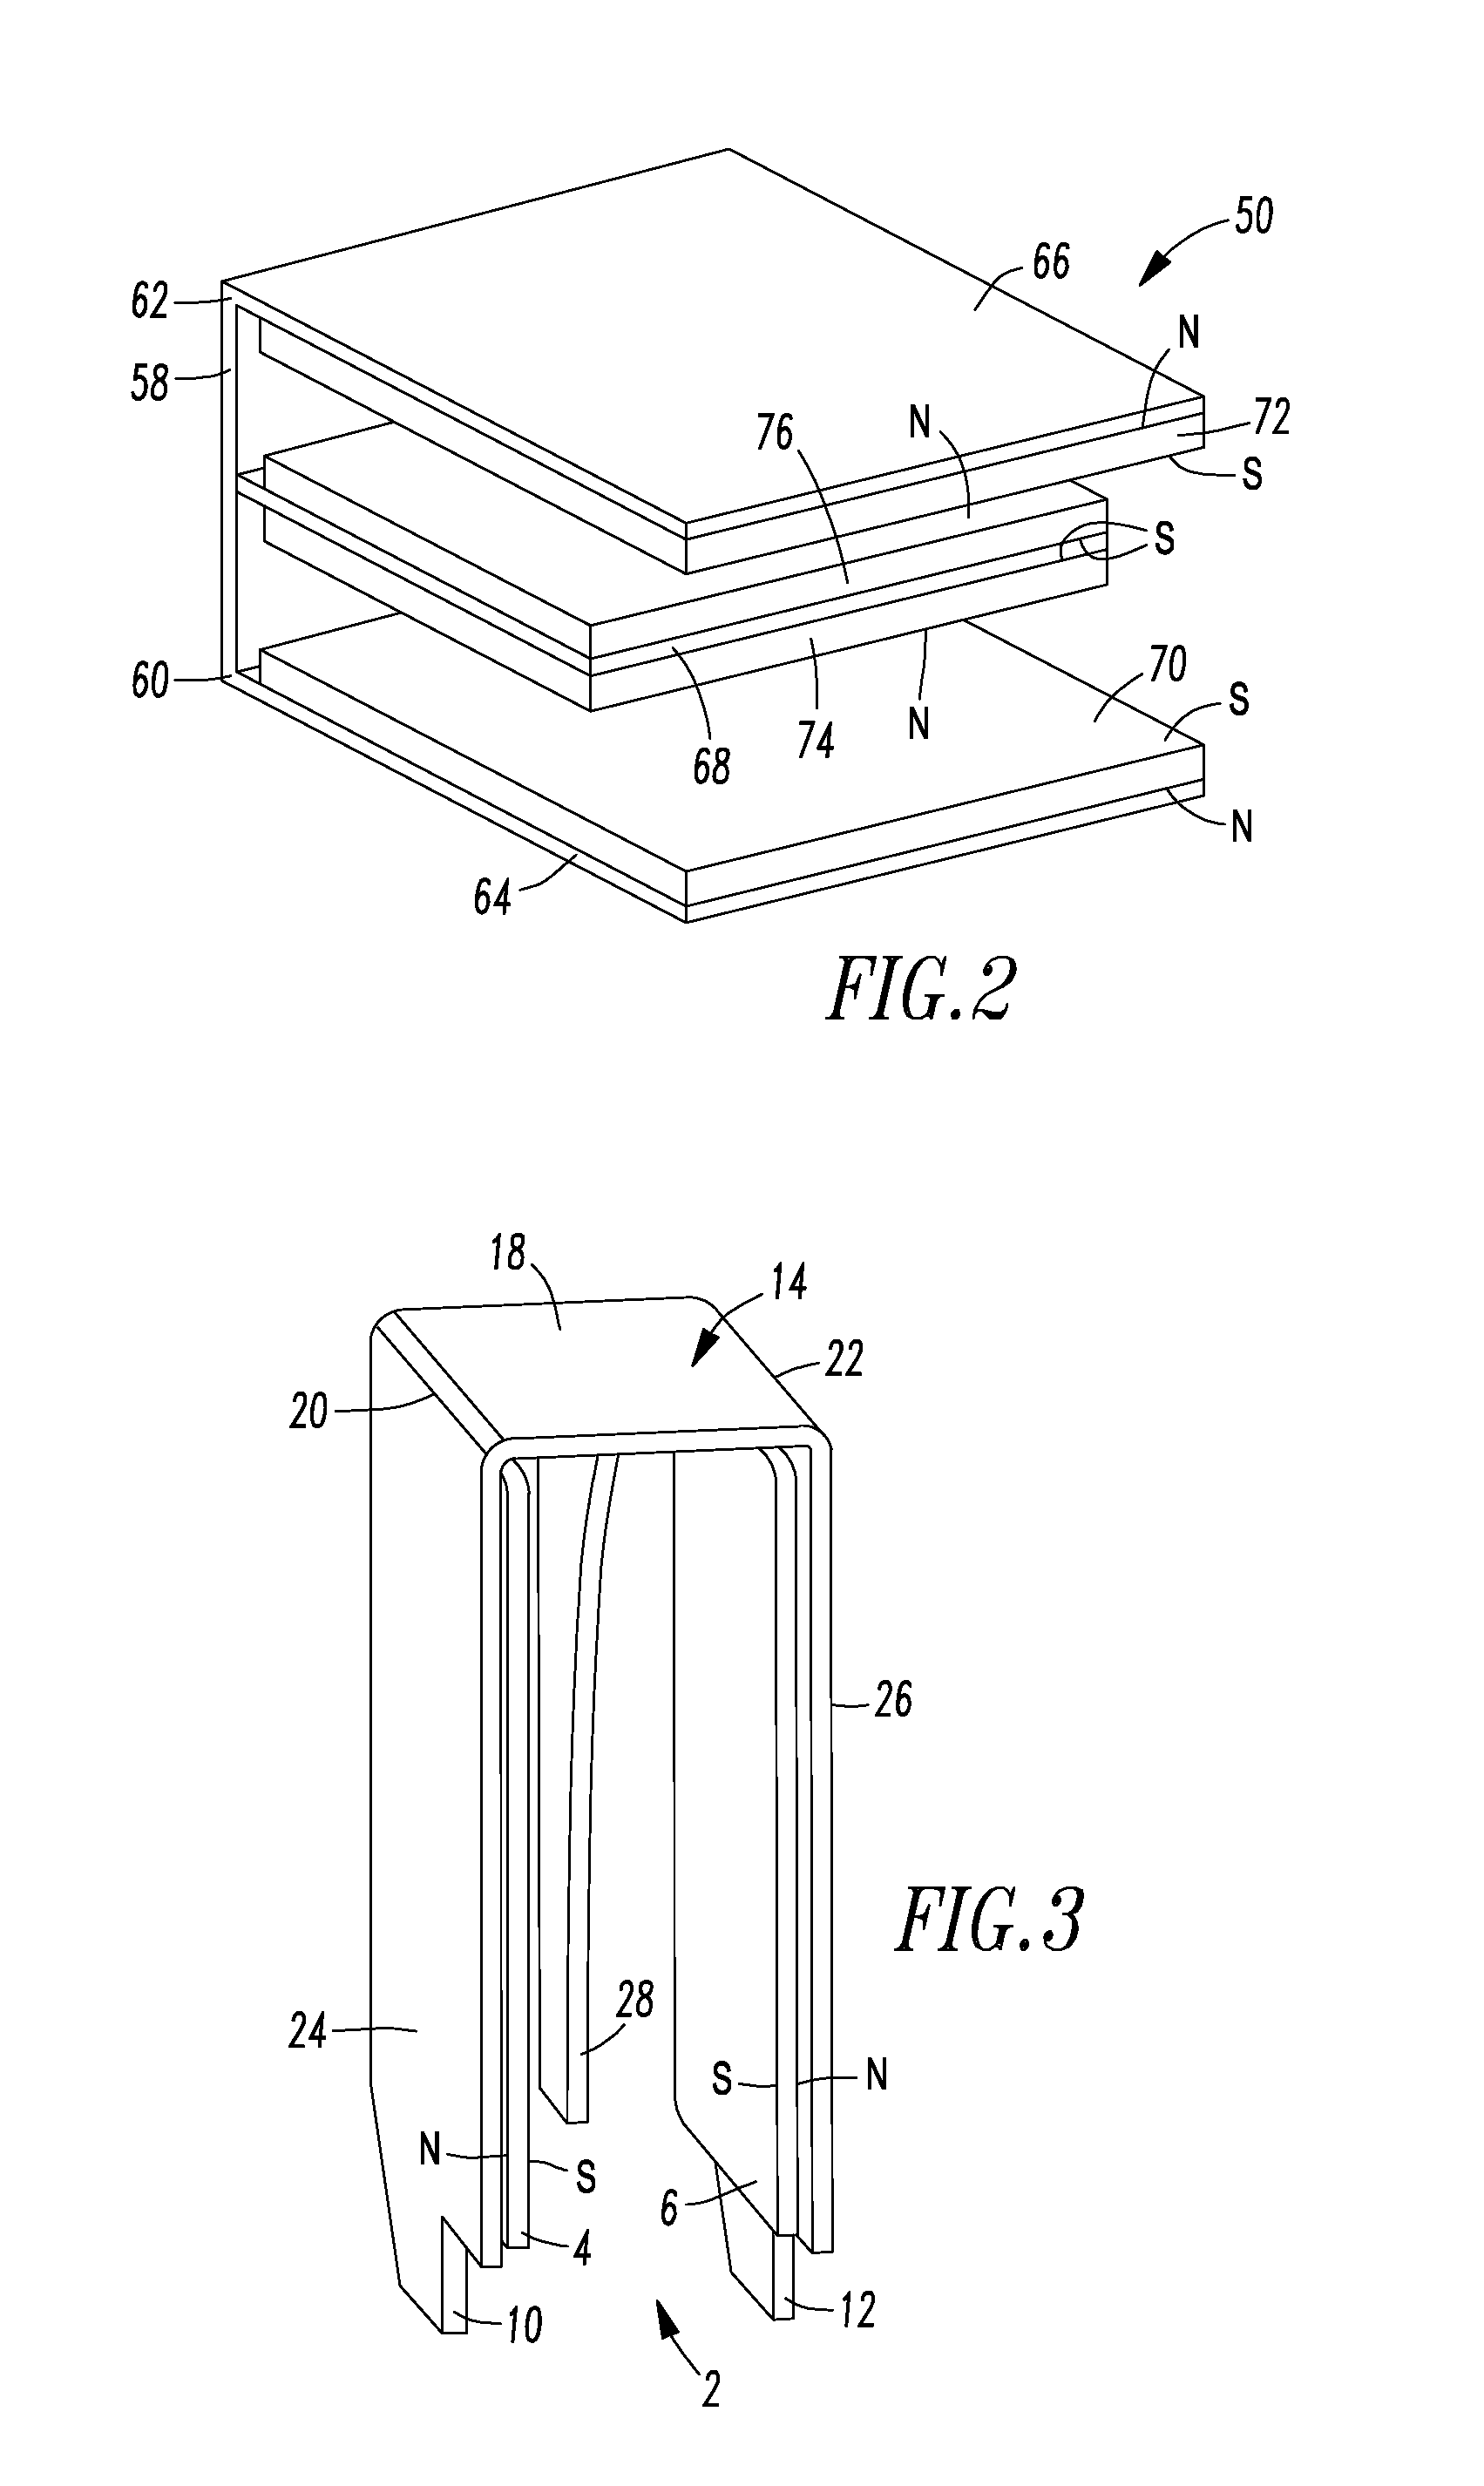 Single direct current arc chamber, and bi-directional direct current electrical switching apparatus employing the same